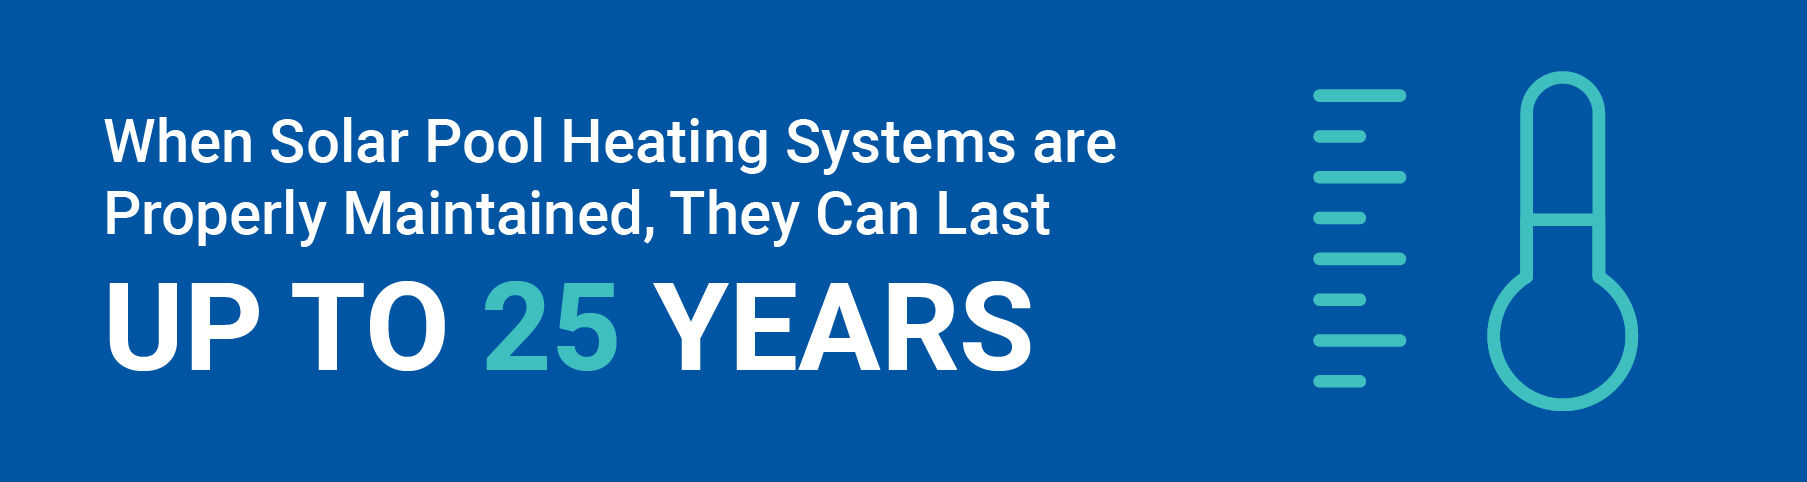 Infographic explaining pool heating systems can last 25 years